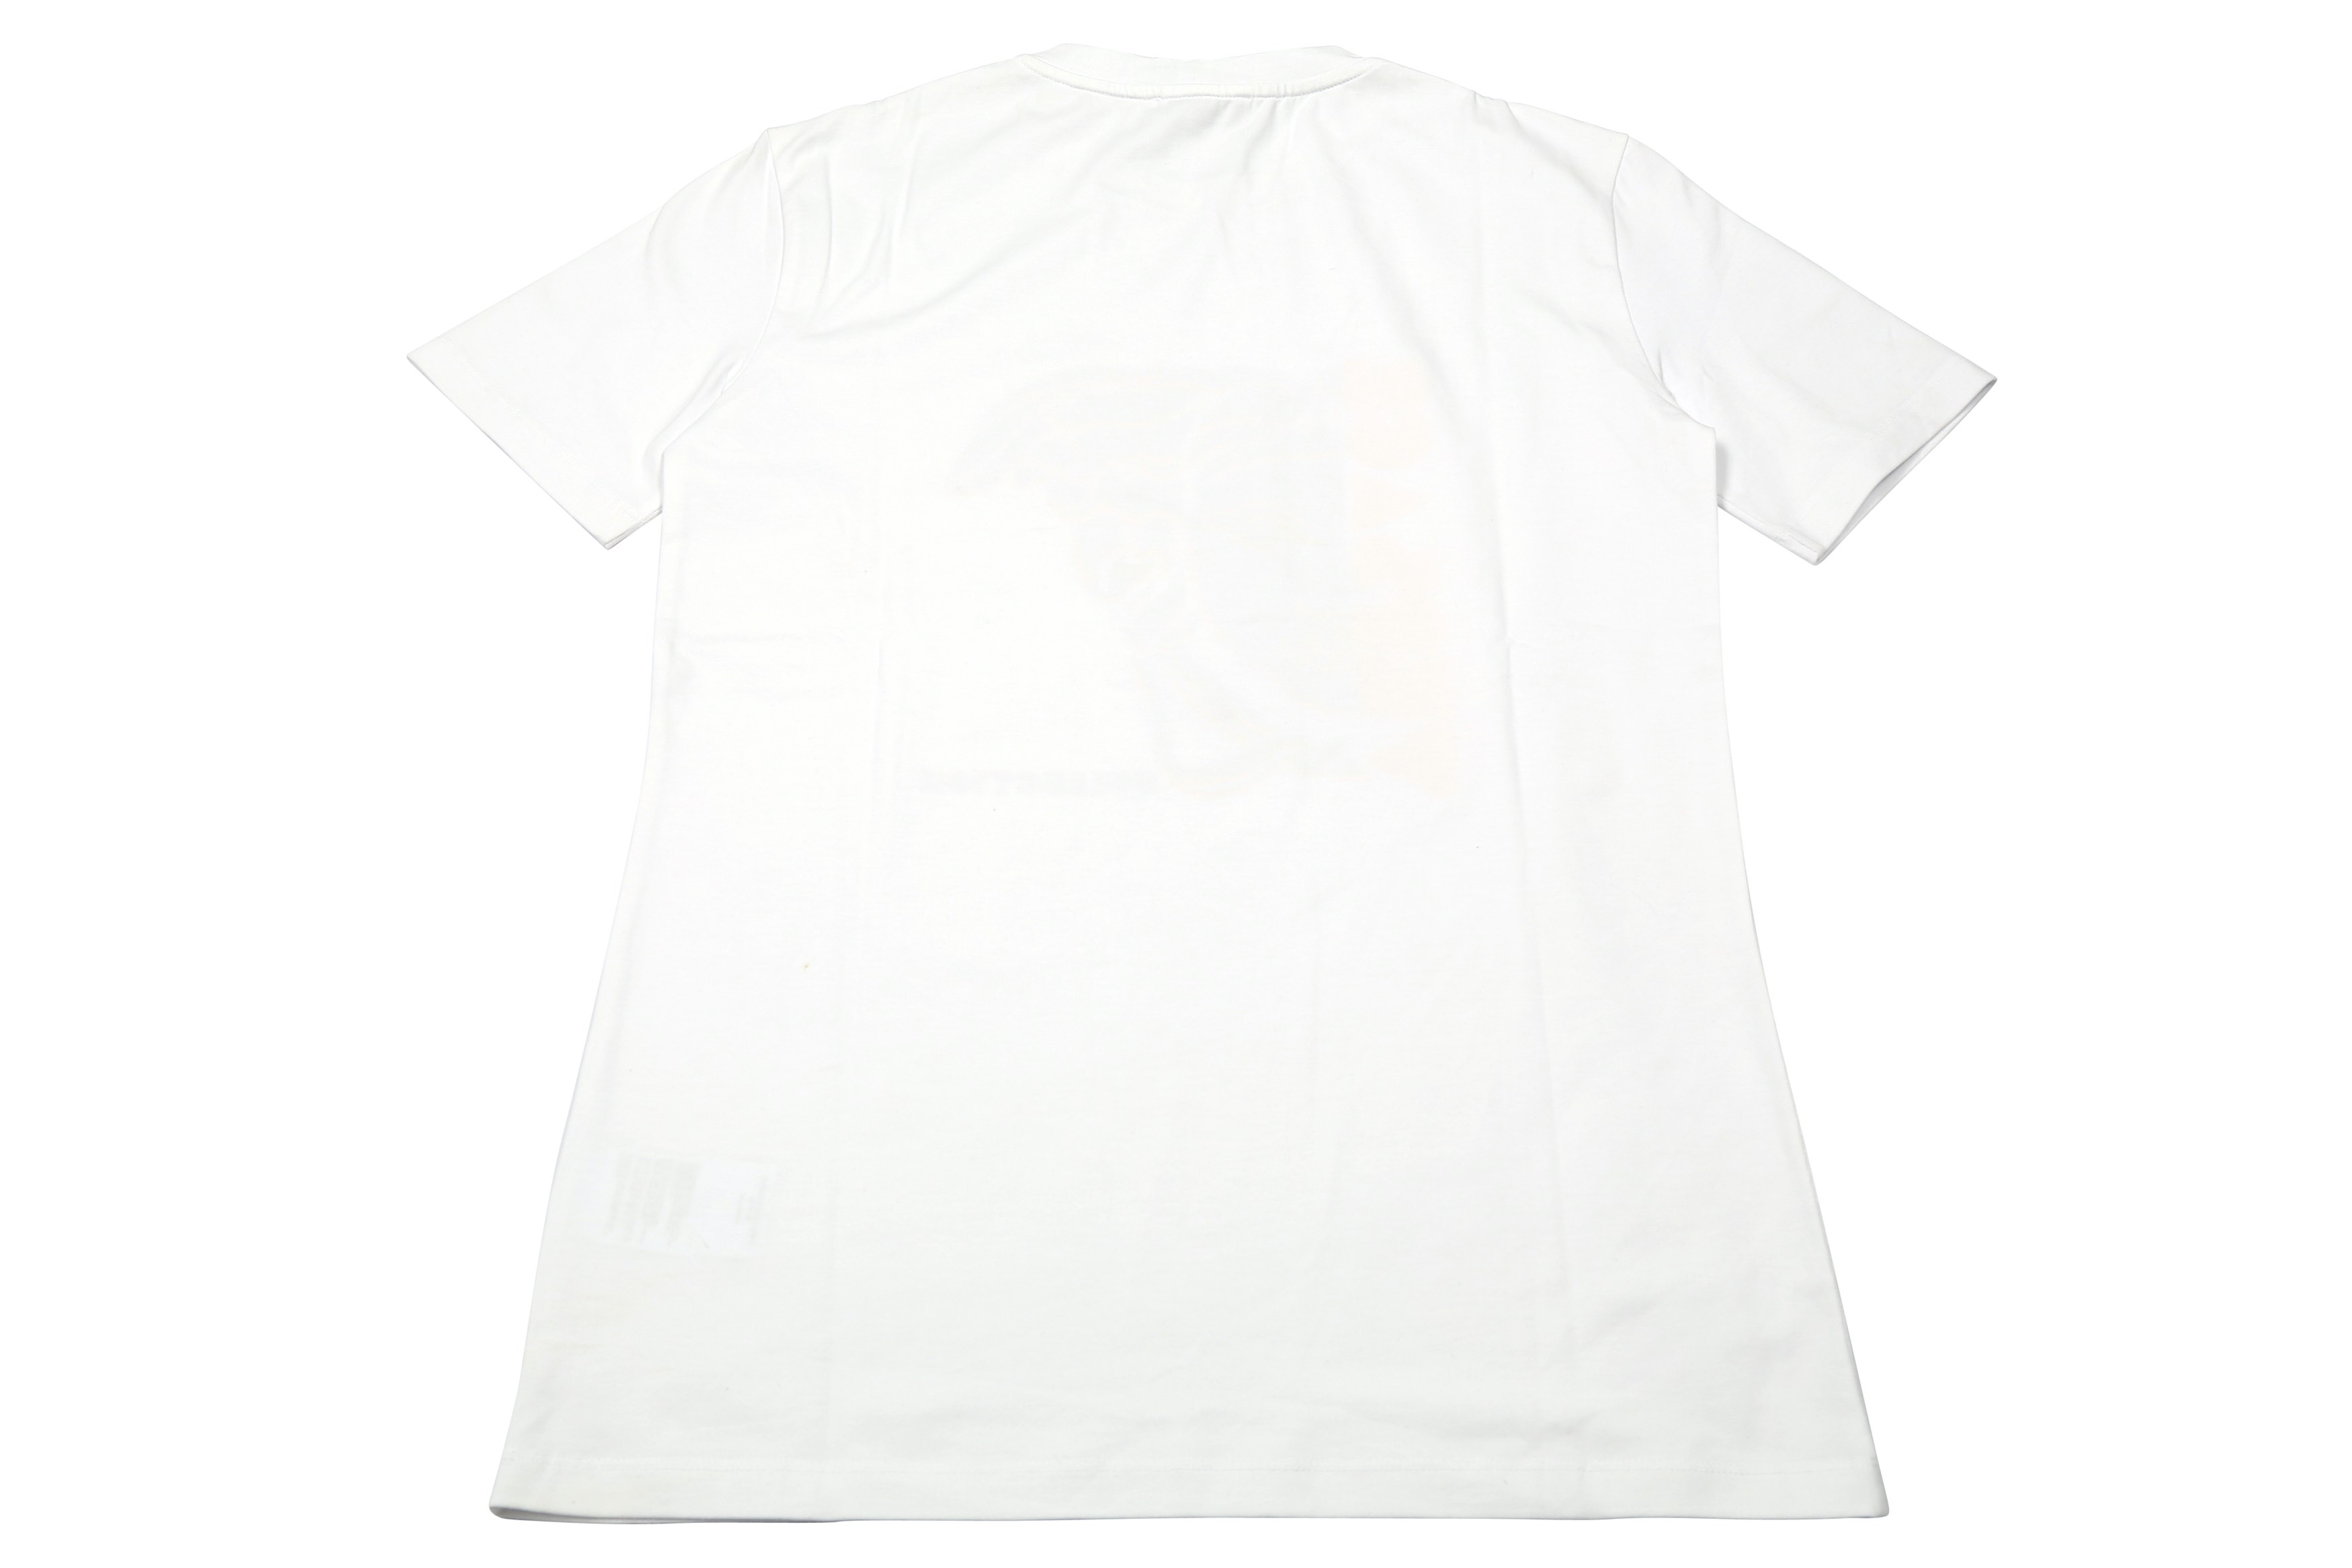 Versace Collection White Medusa Logo T-Shirt - Size S - Image 2 of 4